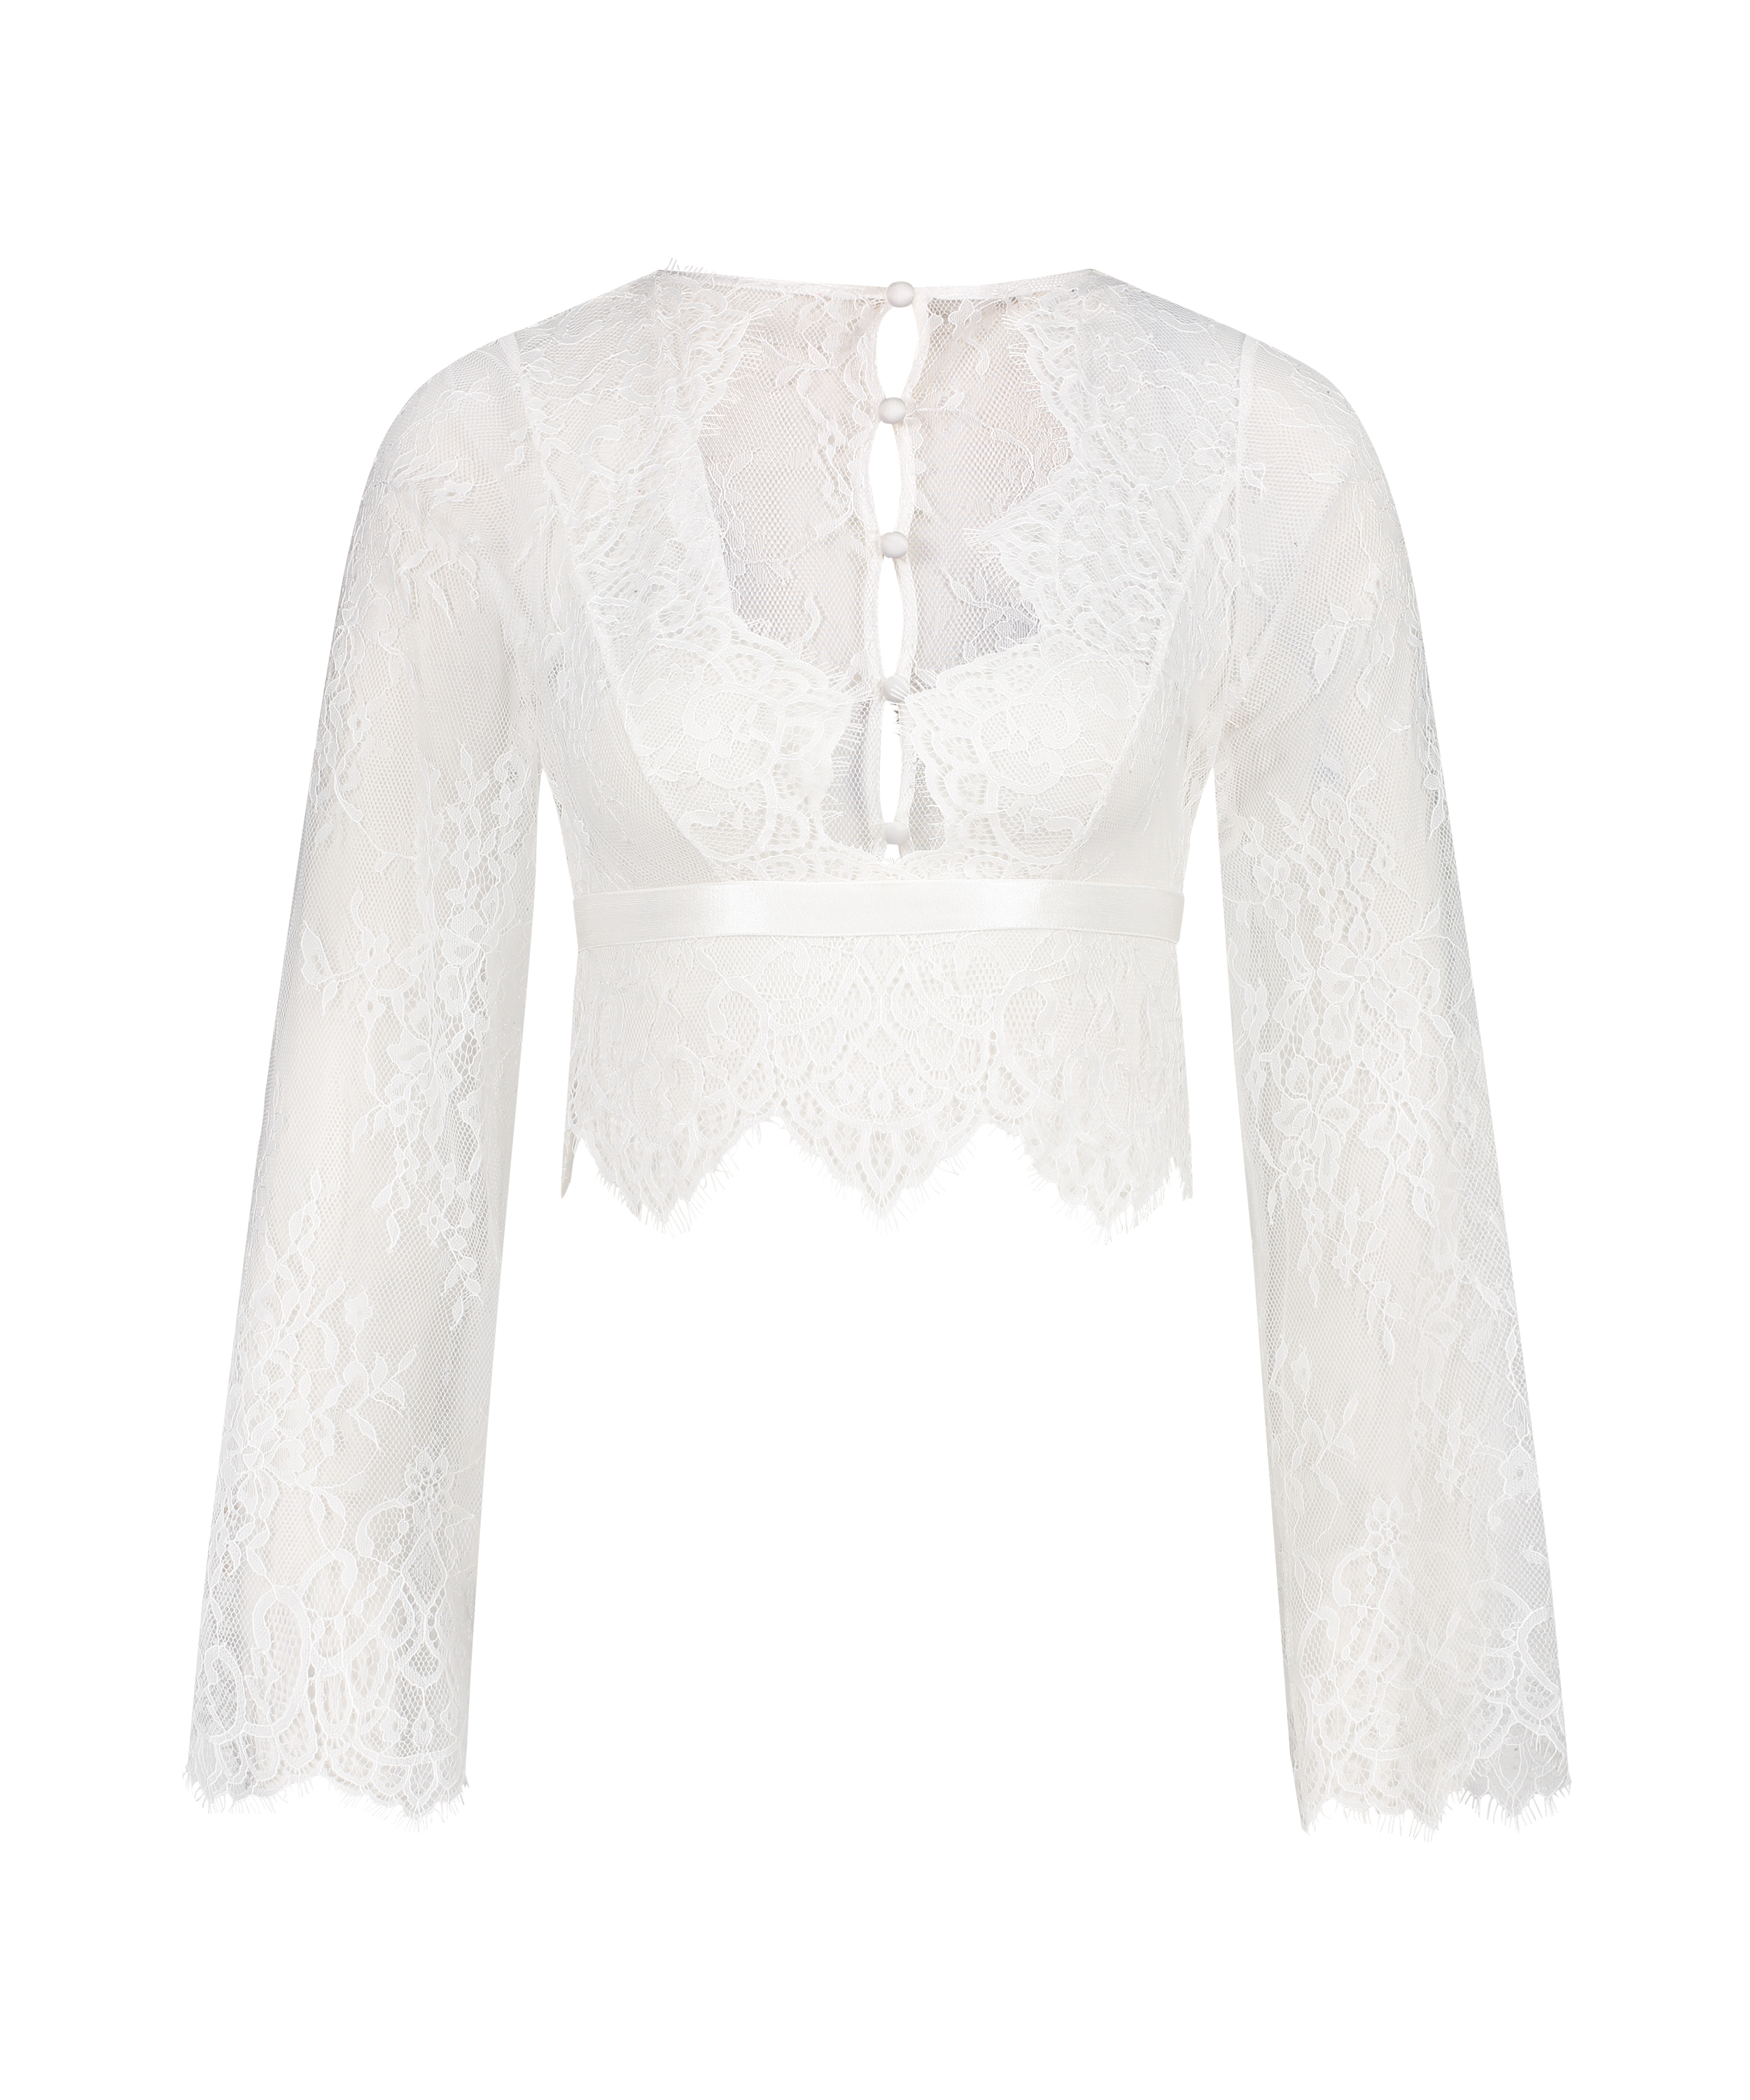 Top Allover Lace, hvid, main